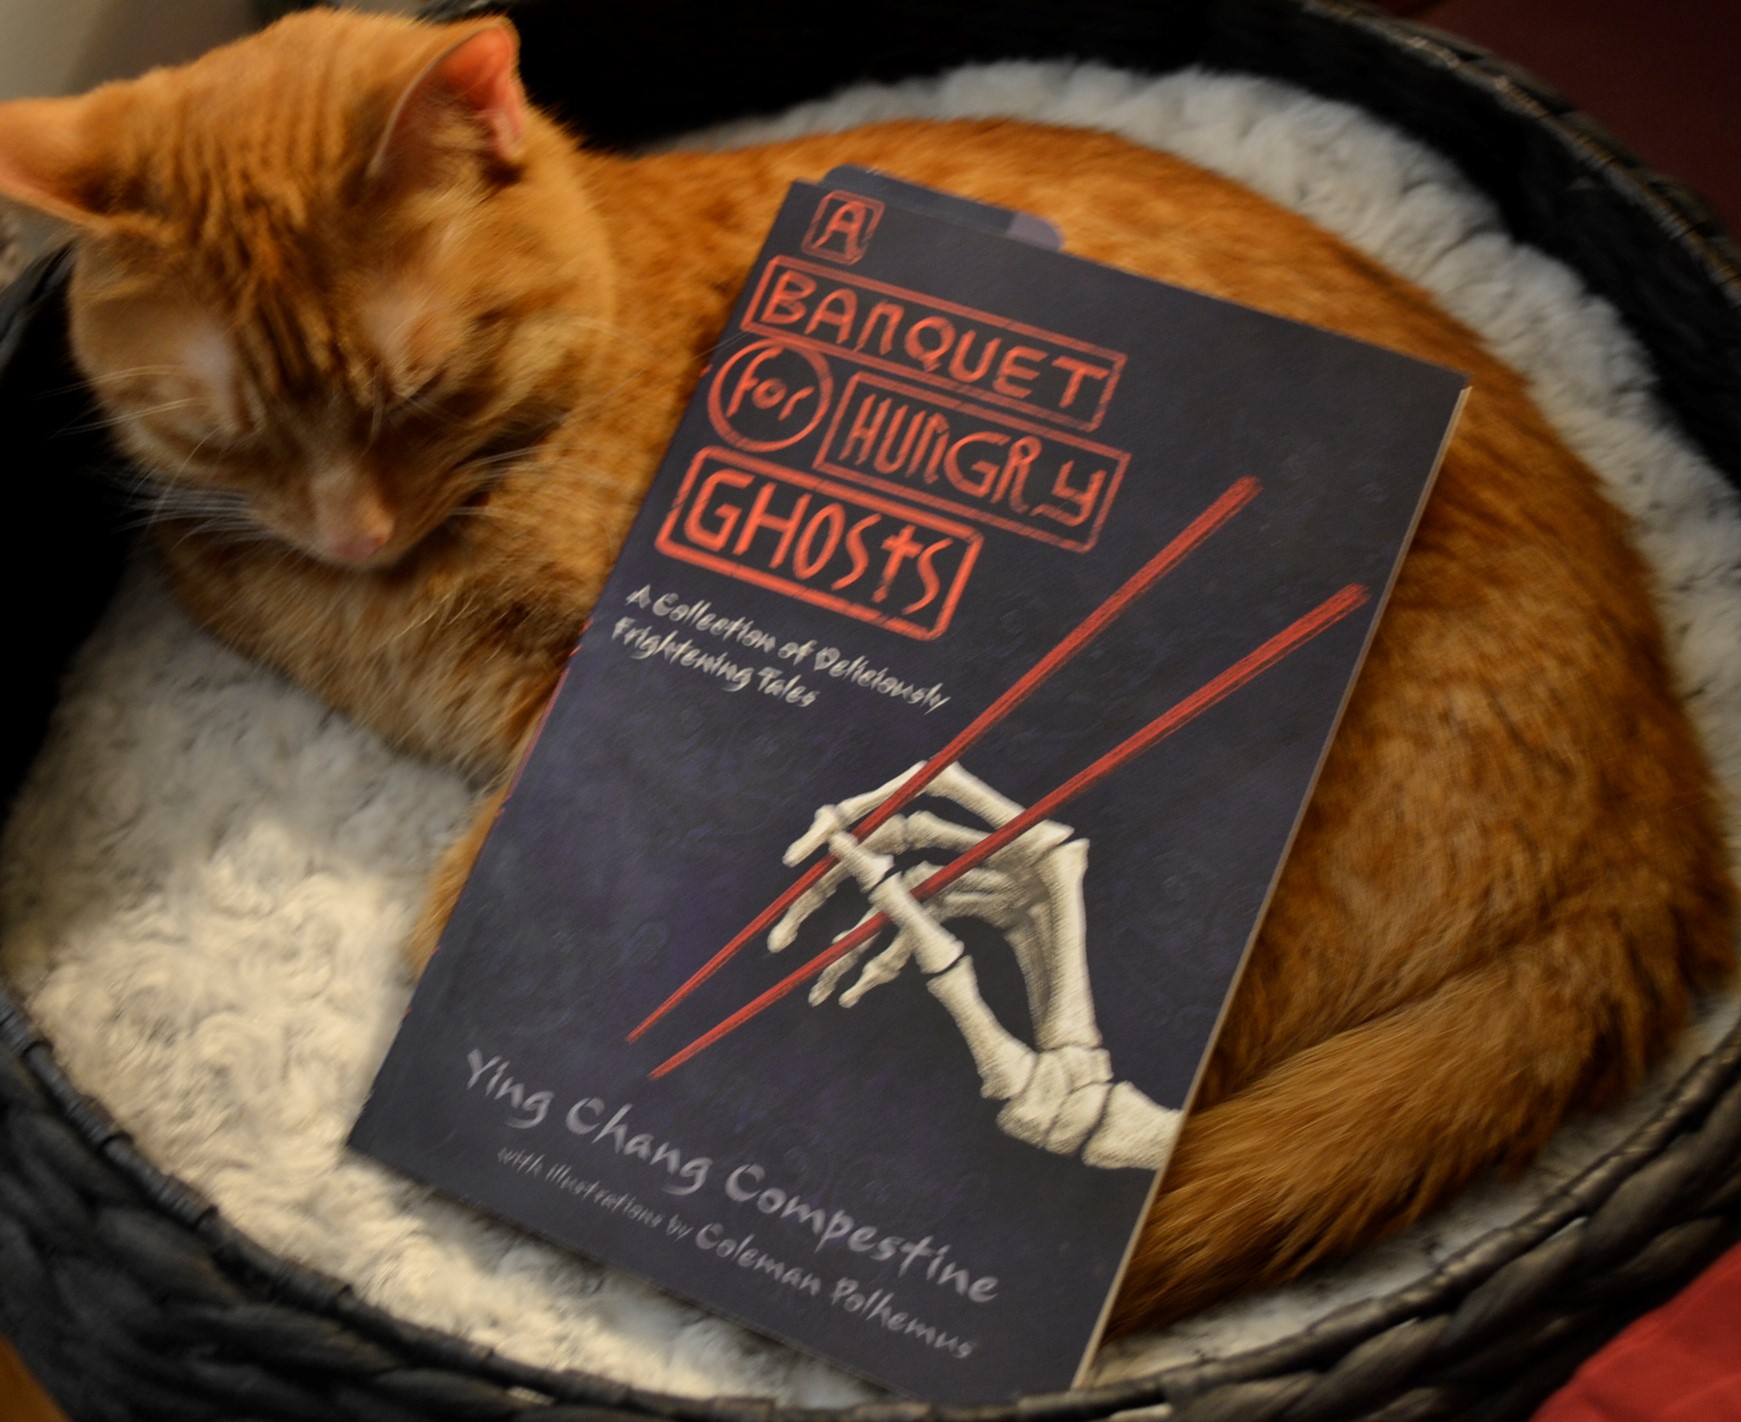 An orange tabby sleeping beside A Banquet for Hungry Ghosts